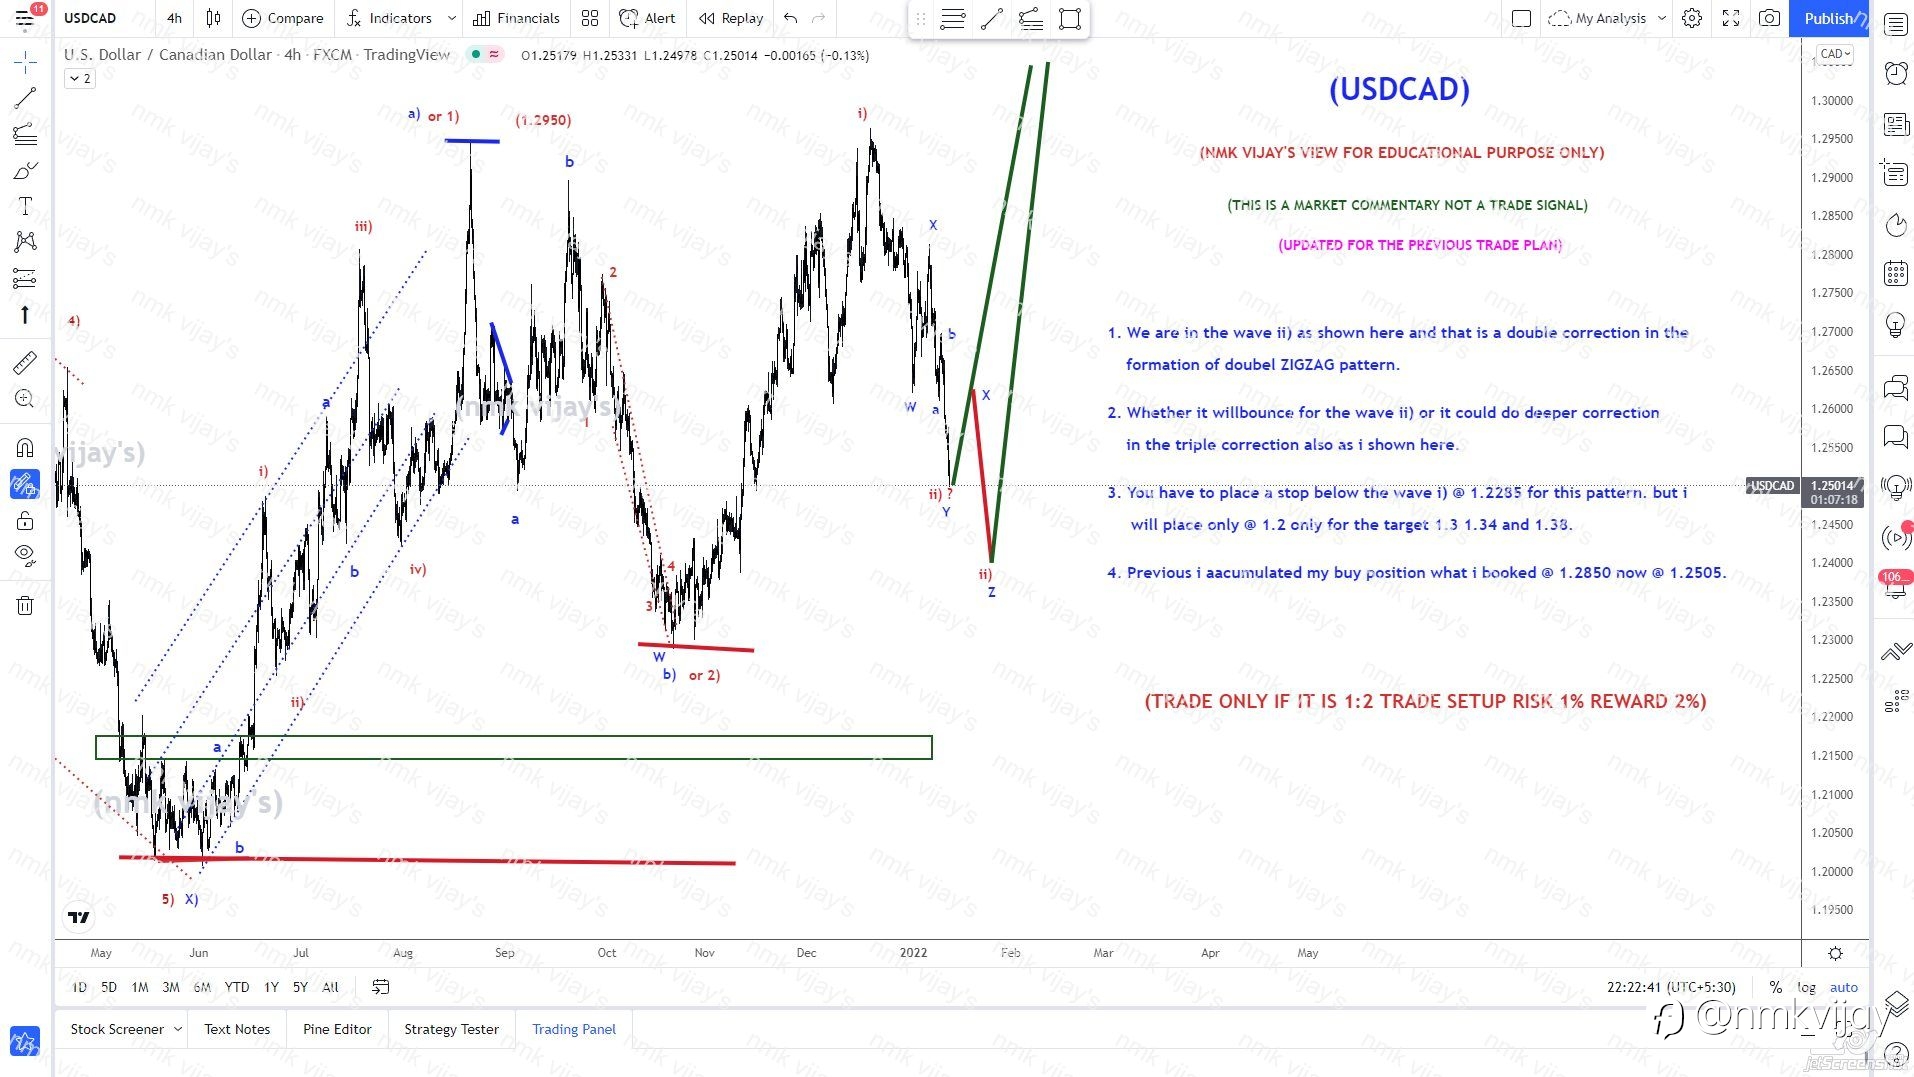 USDCAD-Wave ii) is a Double zigzag may be triple ?